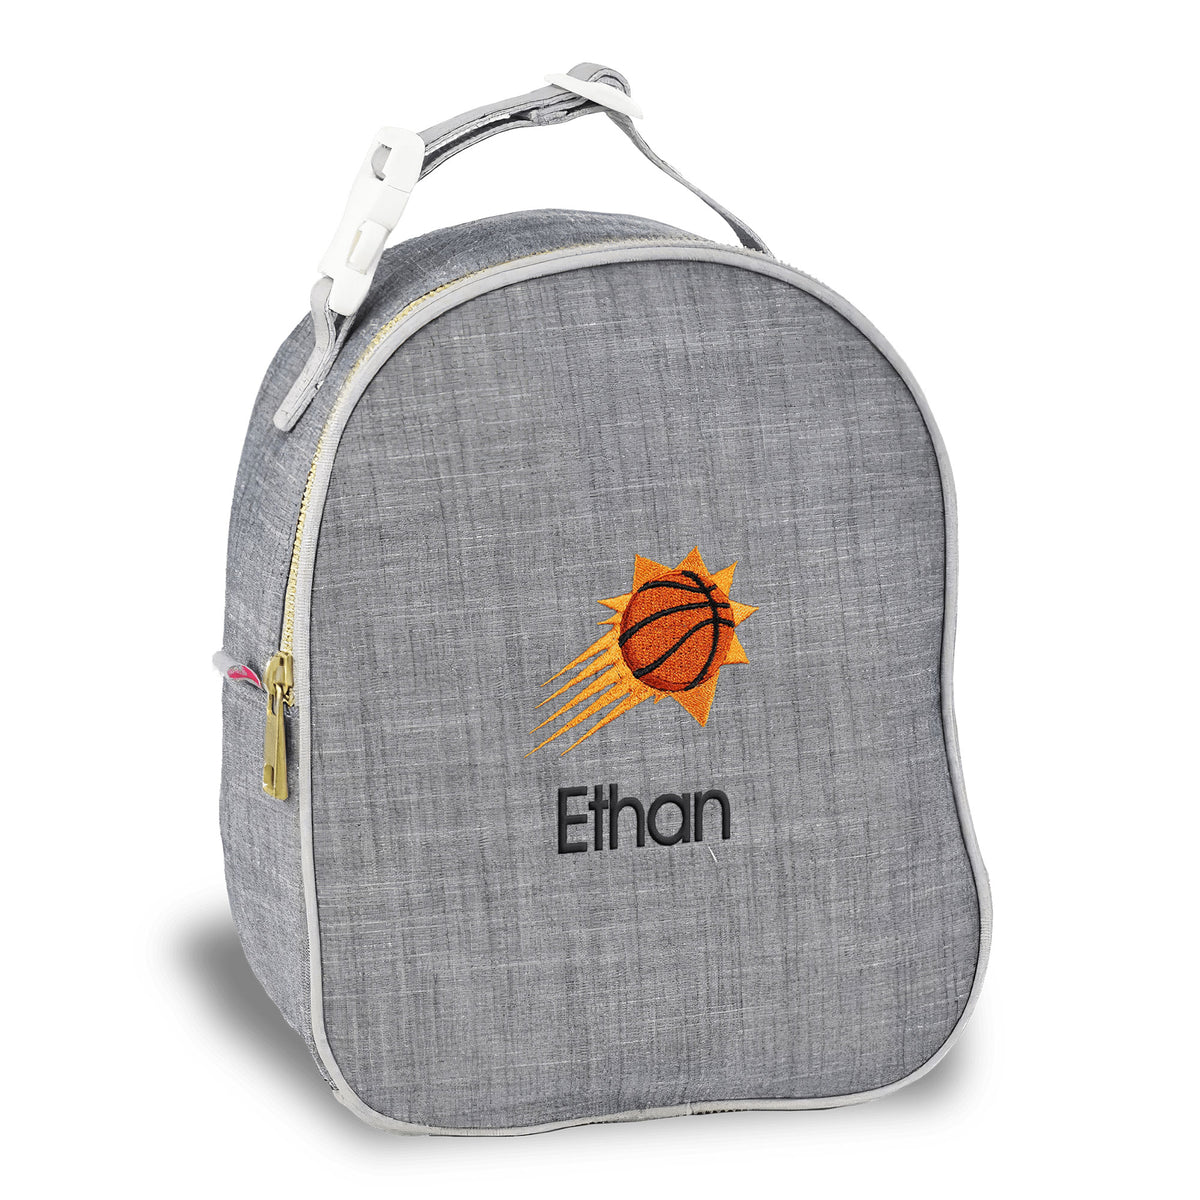 Personalized Phoenix Suns Insulated Bag – Designs by Chad & Jake